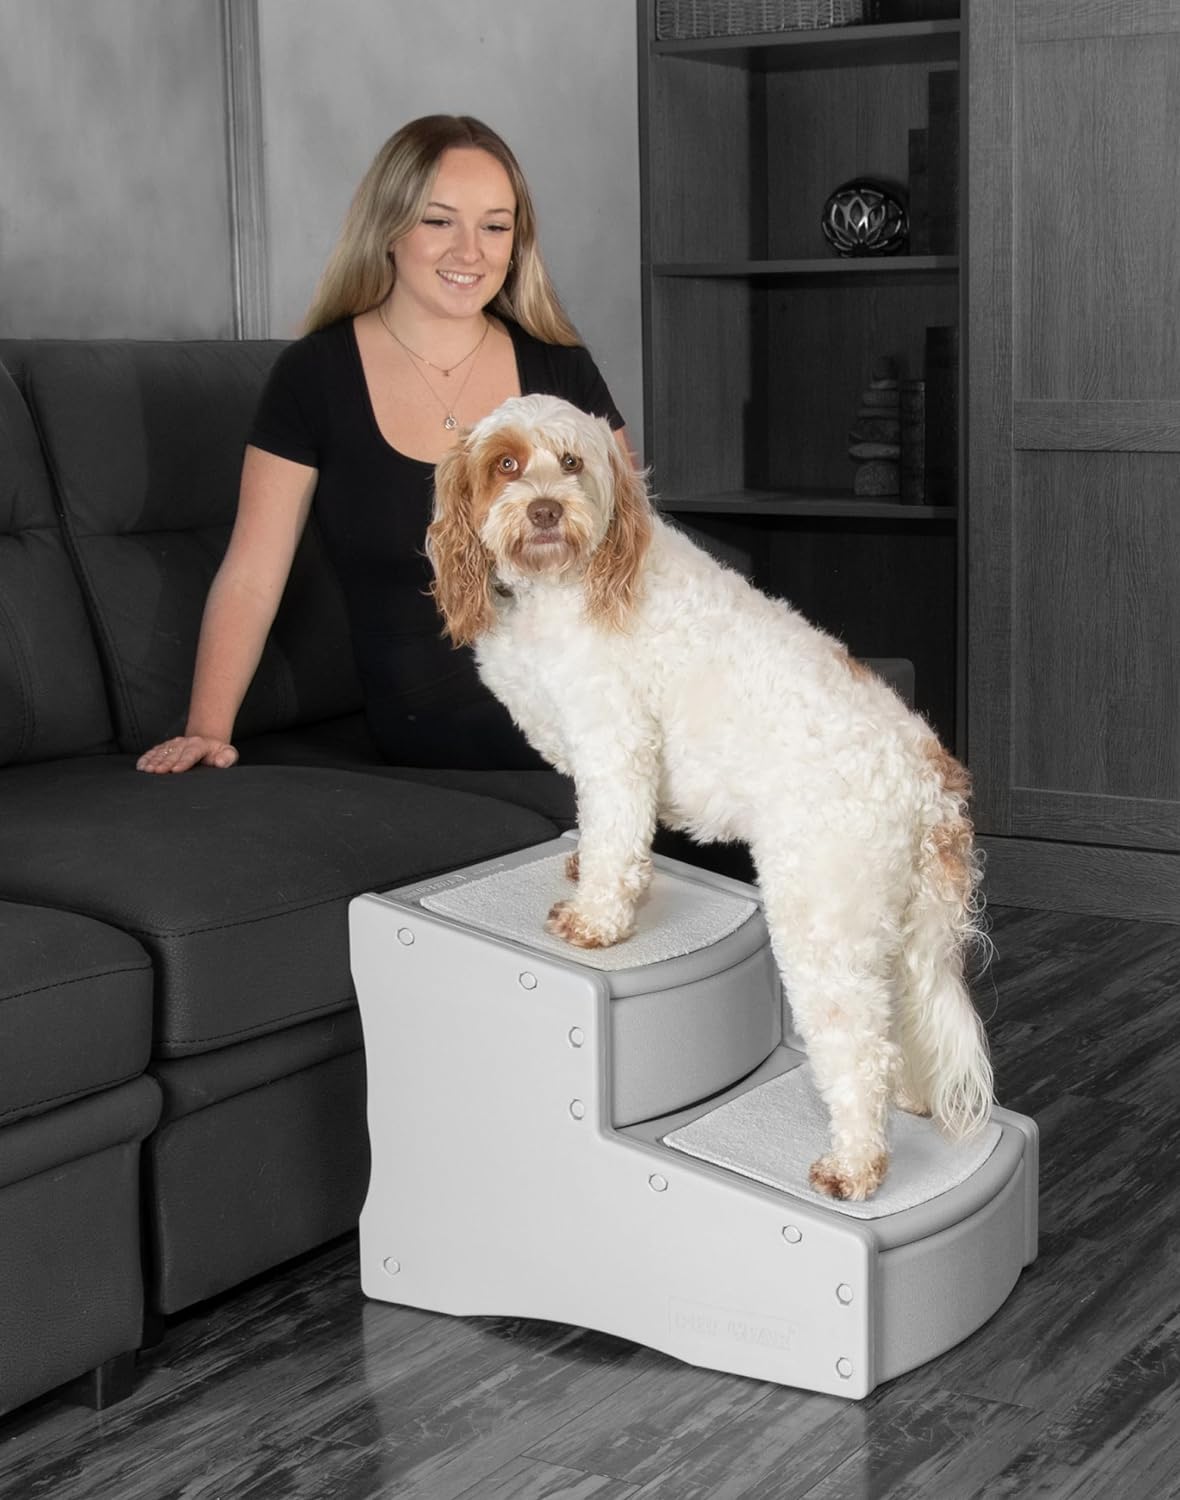 Pet Gear Easy Step II Extra Wide Pet Stairs, 2 Step for Dogs\/Cats up to 200 pounds, Removable\/Washable Carpet, Easy Assembly (No Tools Required), 3 Colors